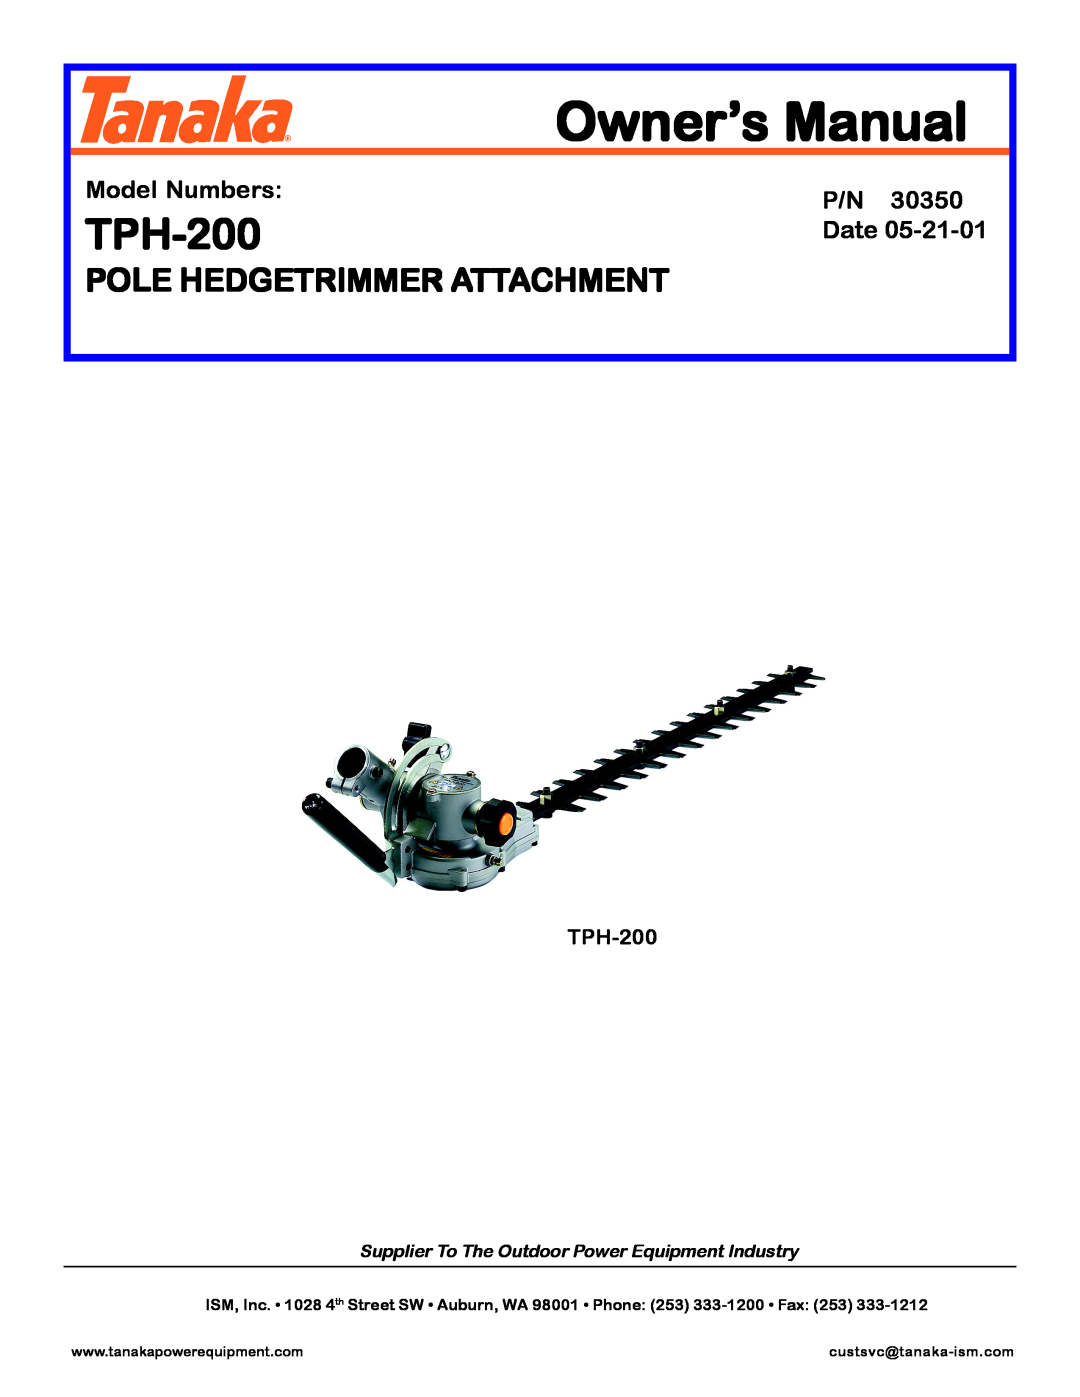 Tanaka TPH-200 manual Pole Hedgetrimmer Attachment, Model Numbers, Date, Supplier To The Outdoor Power Equipment Industry 